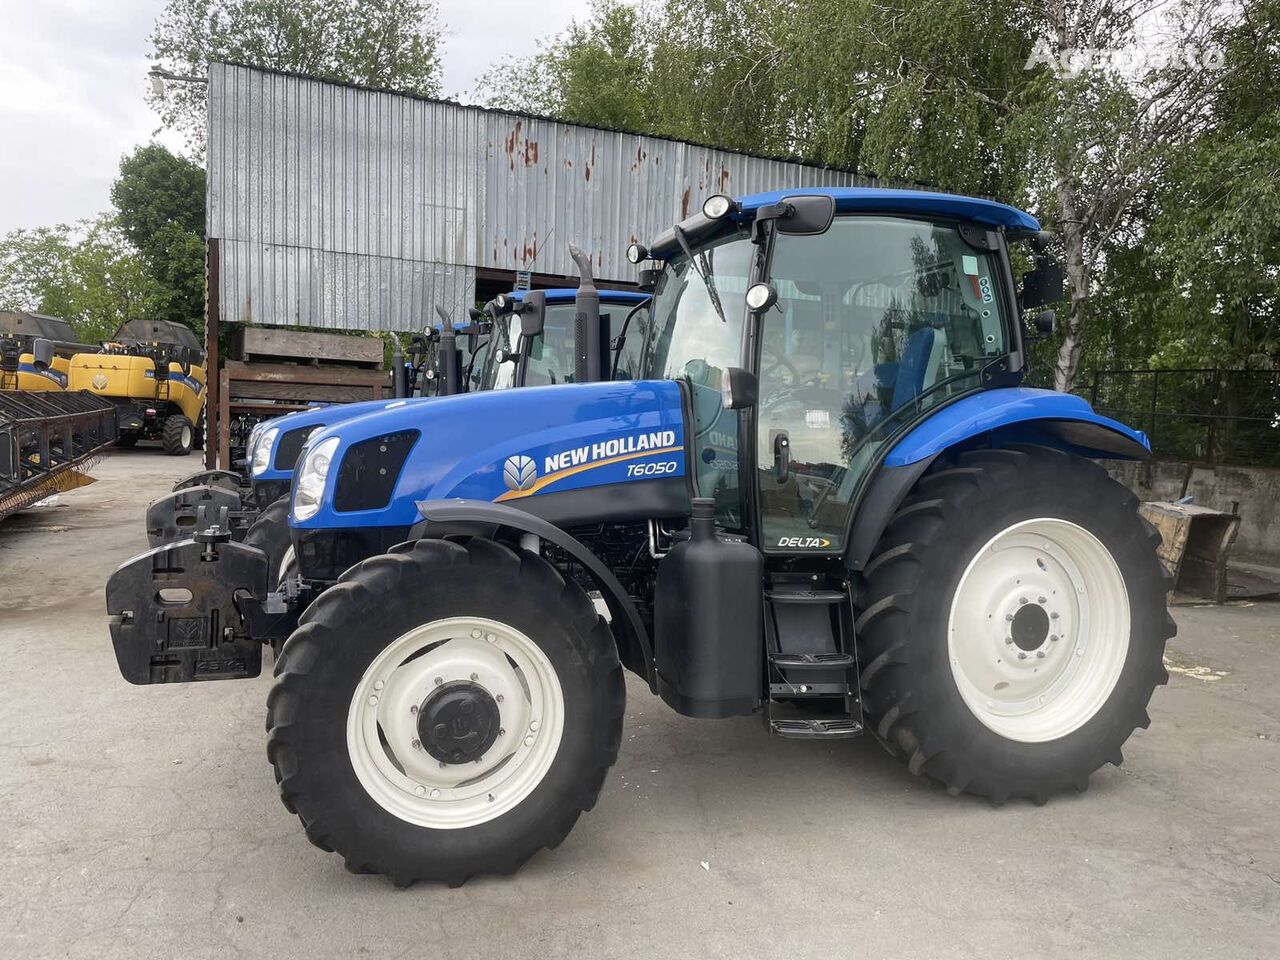 New Holland T6050 wheel tractor